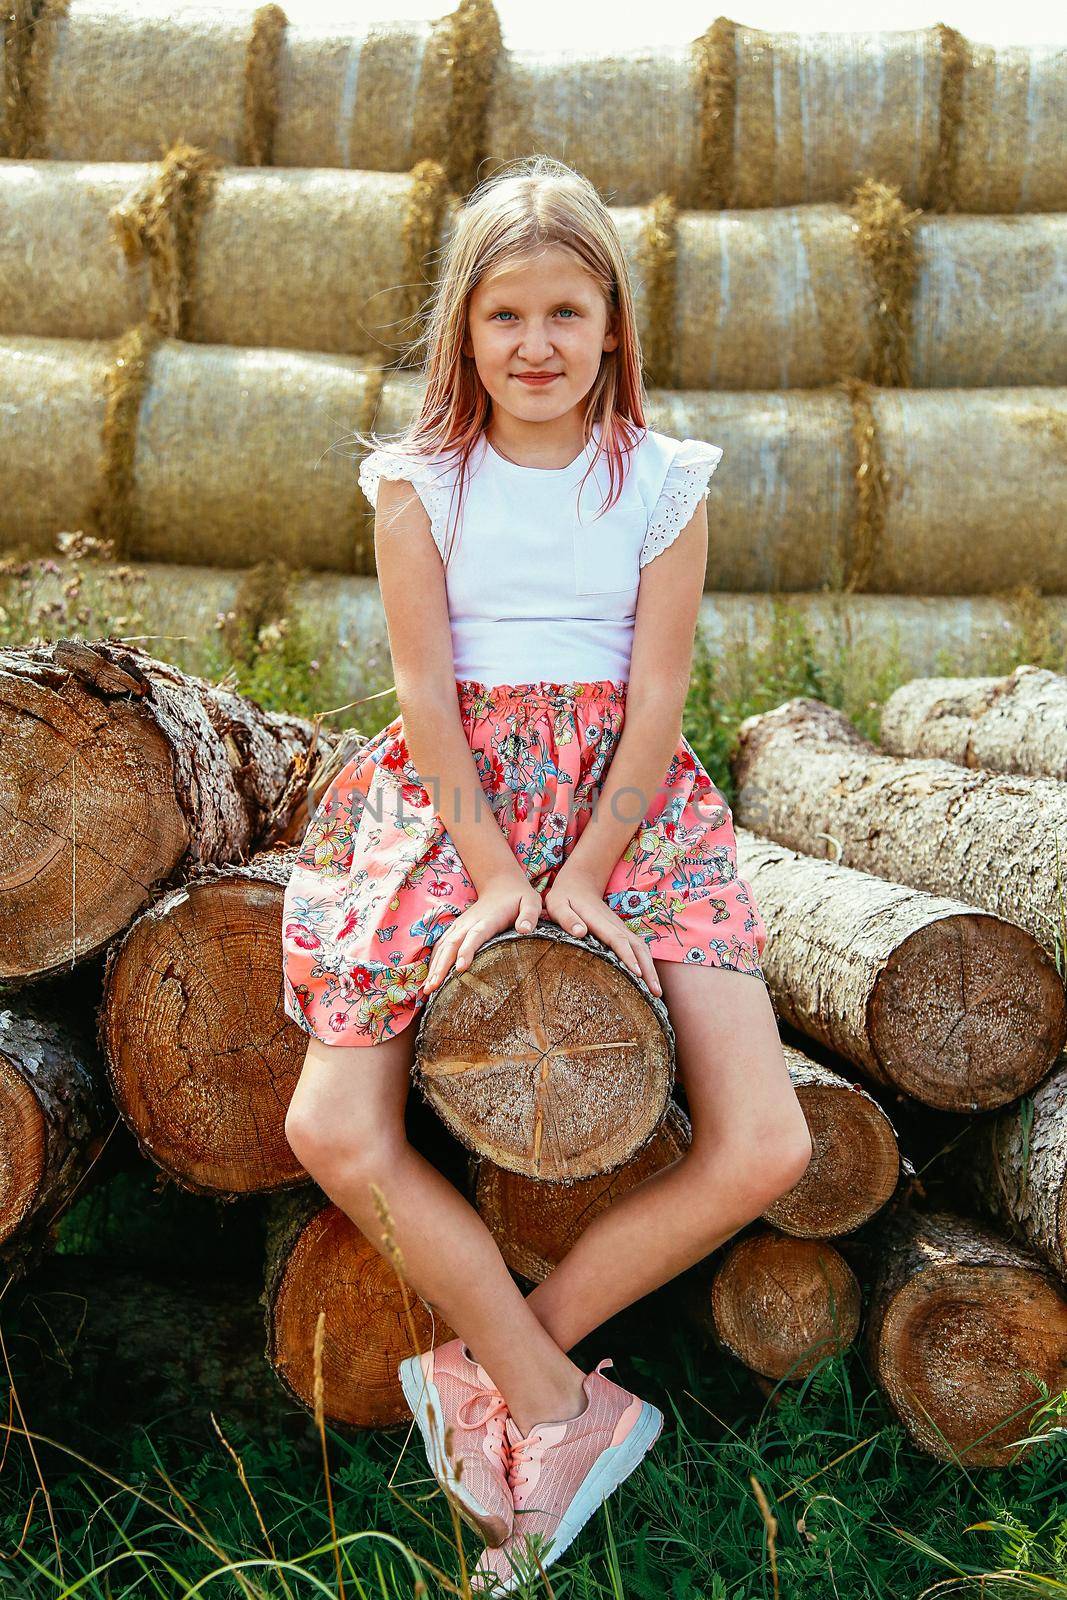 Blonde girl with long flowing hair sits smiling on a log in a pink dress by Mastak80